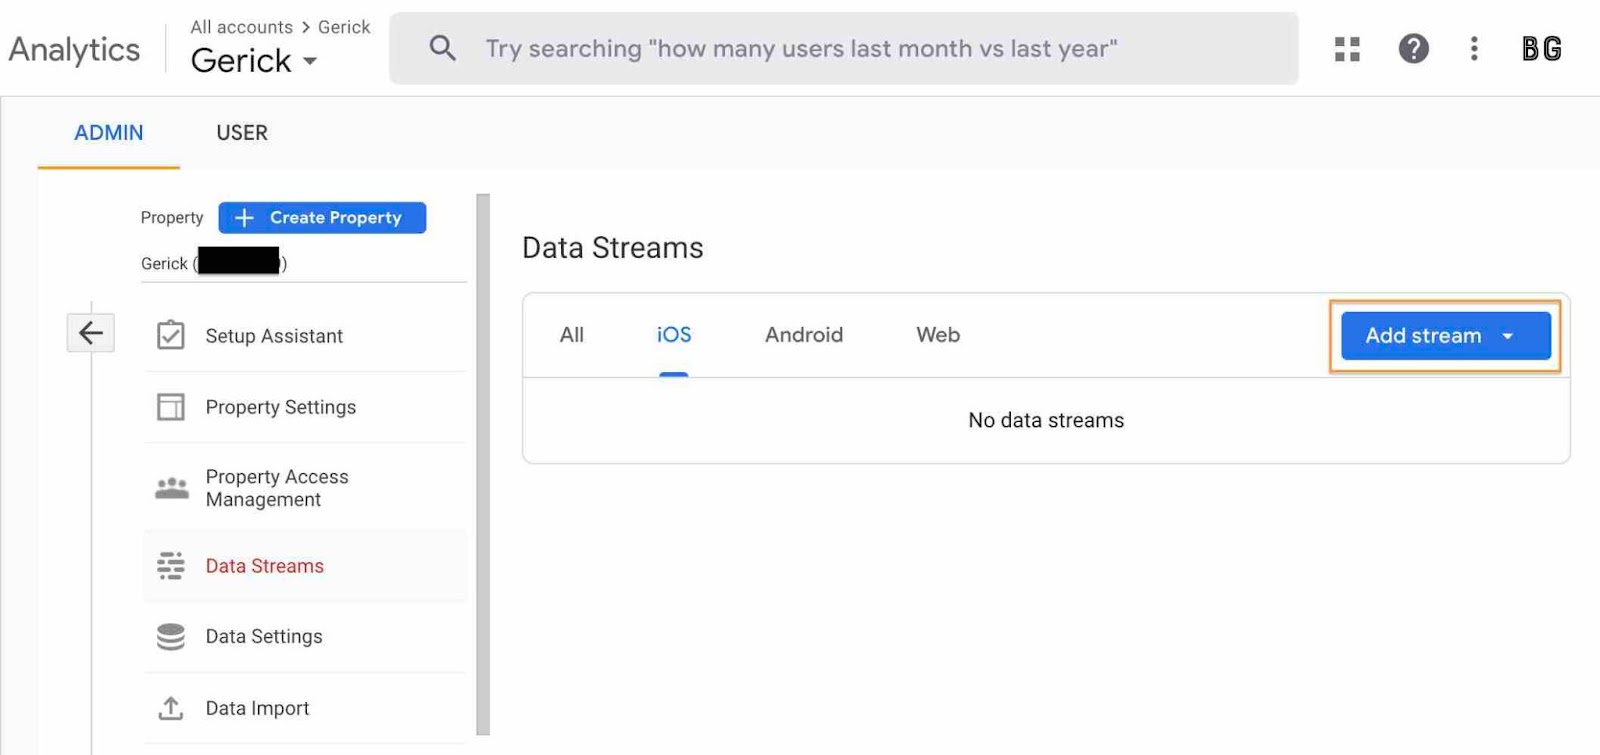 Google Analytics 4 Data Streams. Add stream for iOS or Android.